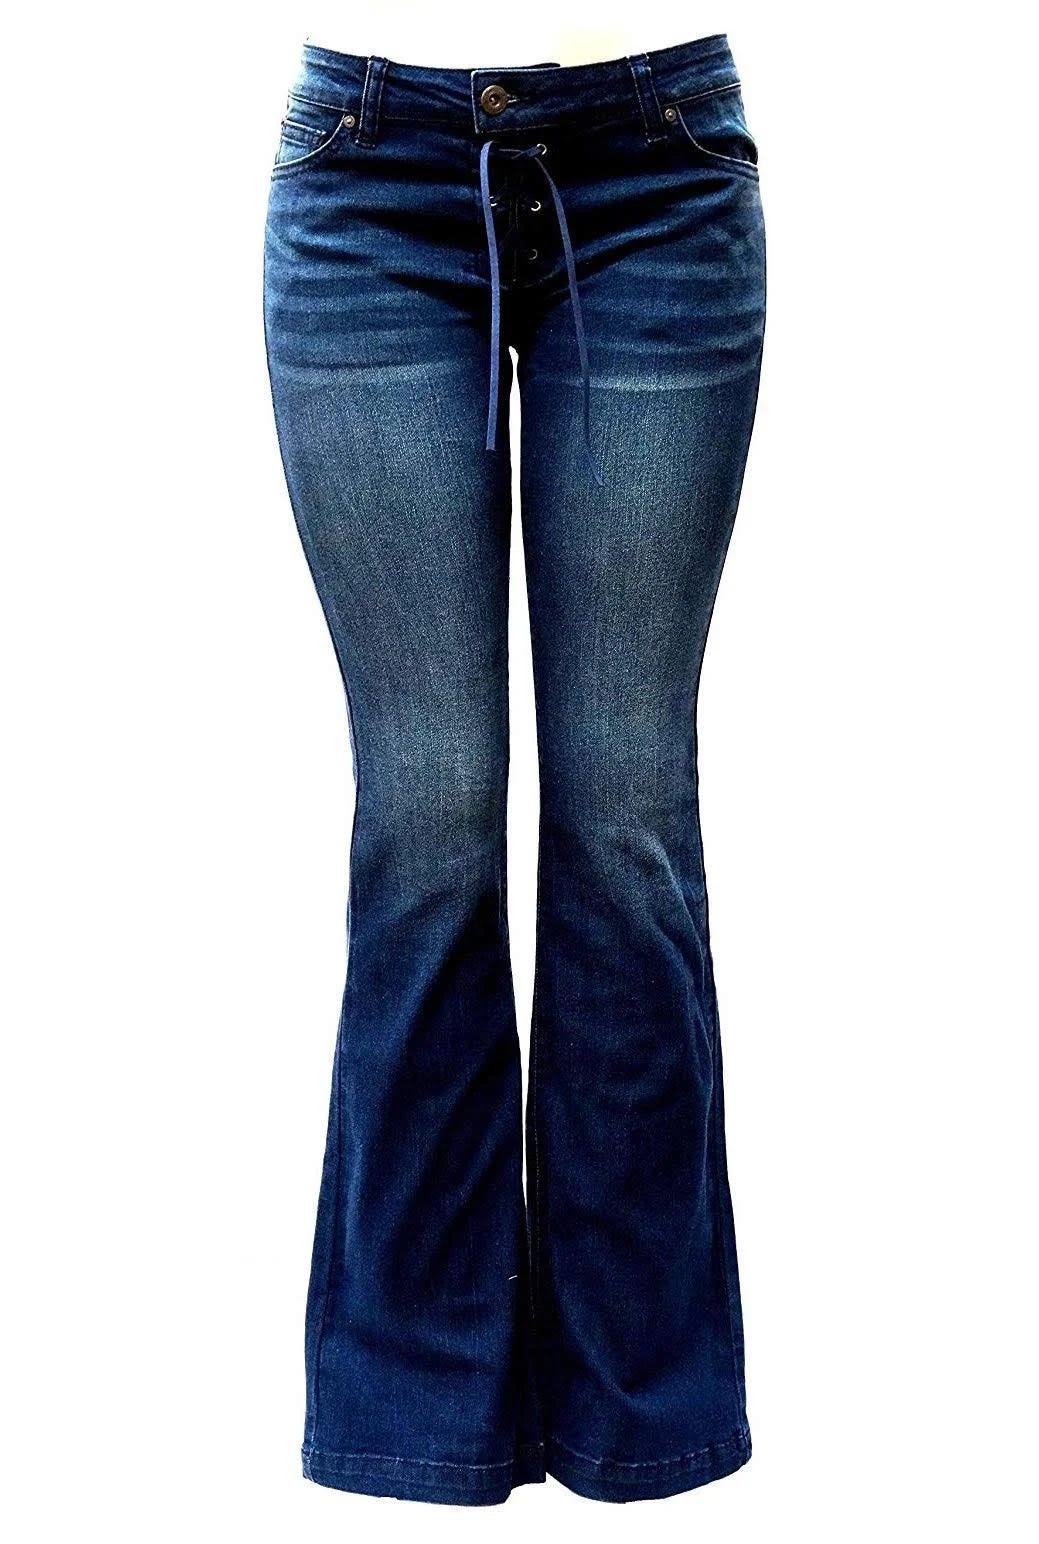 Wax & Jack 70s Style Slim Fit Denim Flared Pants - Flawless Fit and Vintage Charm | Image